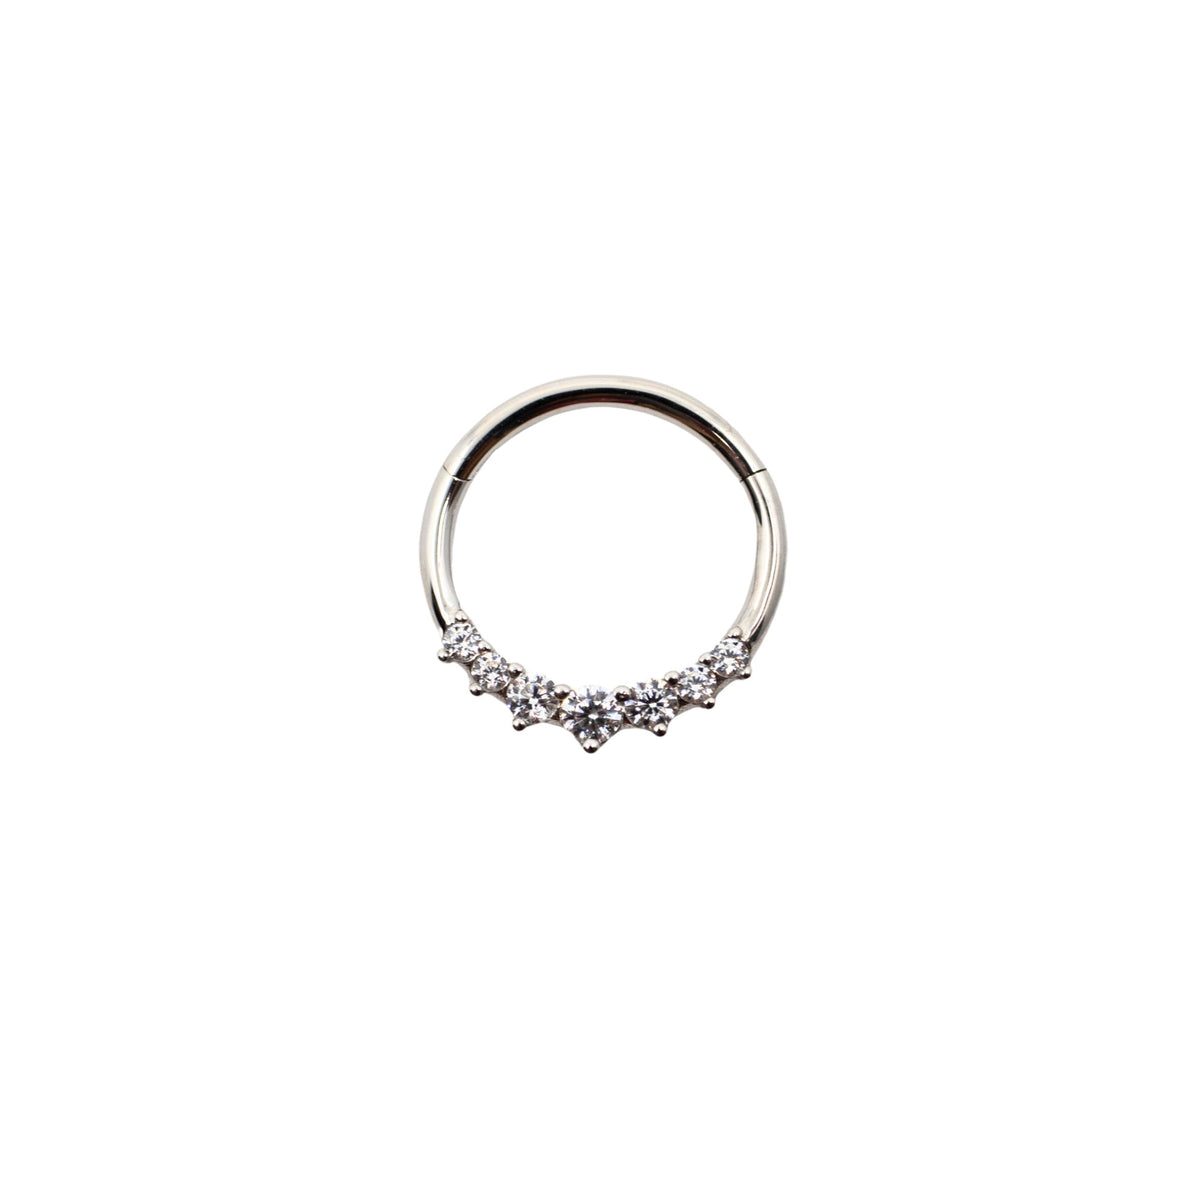 White Gold Hoops Clicker Hoop With Dainty Crystals The Curated Lobe